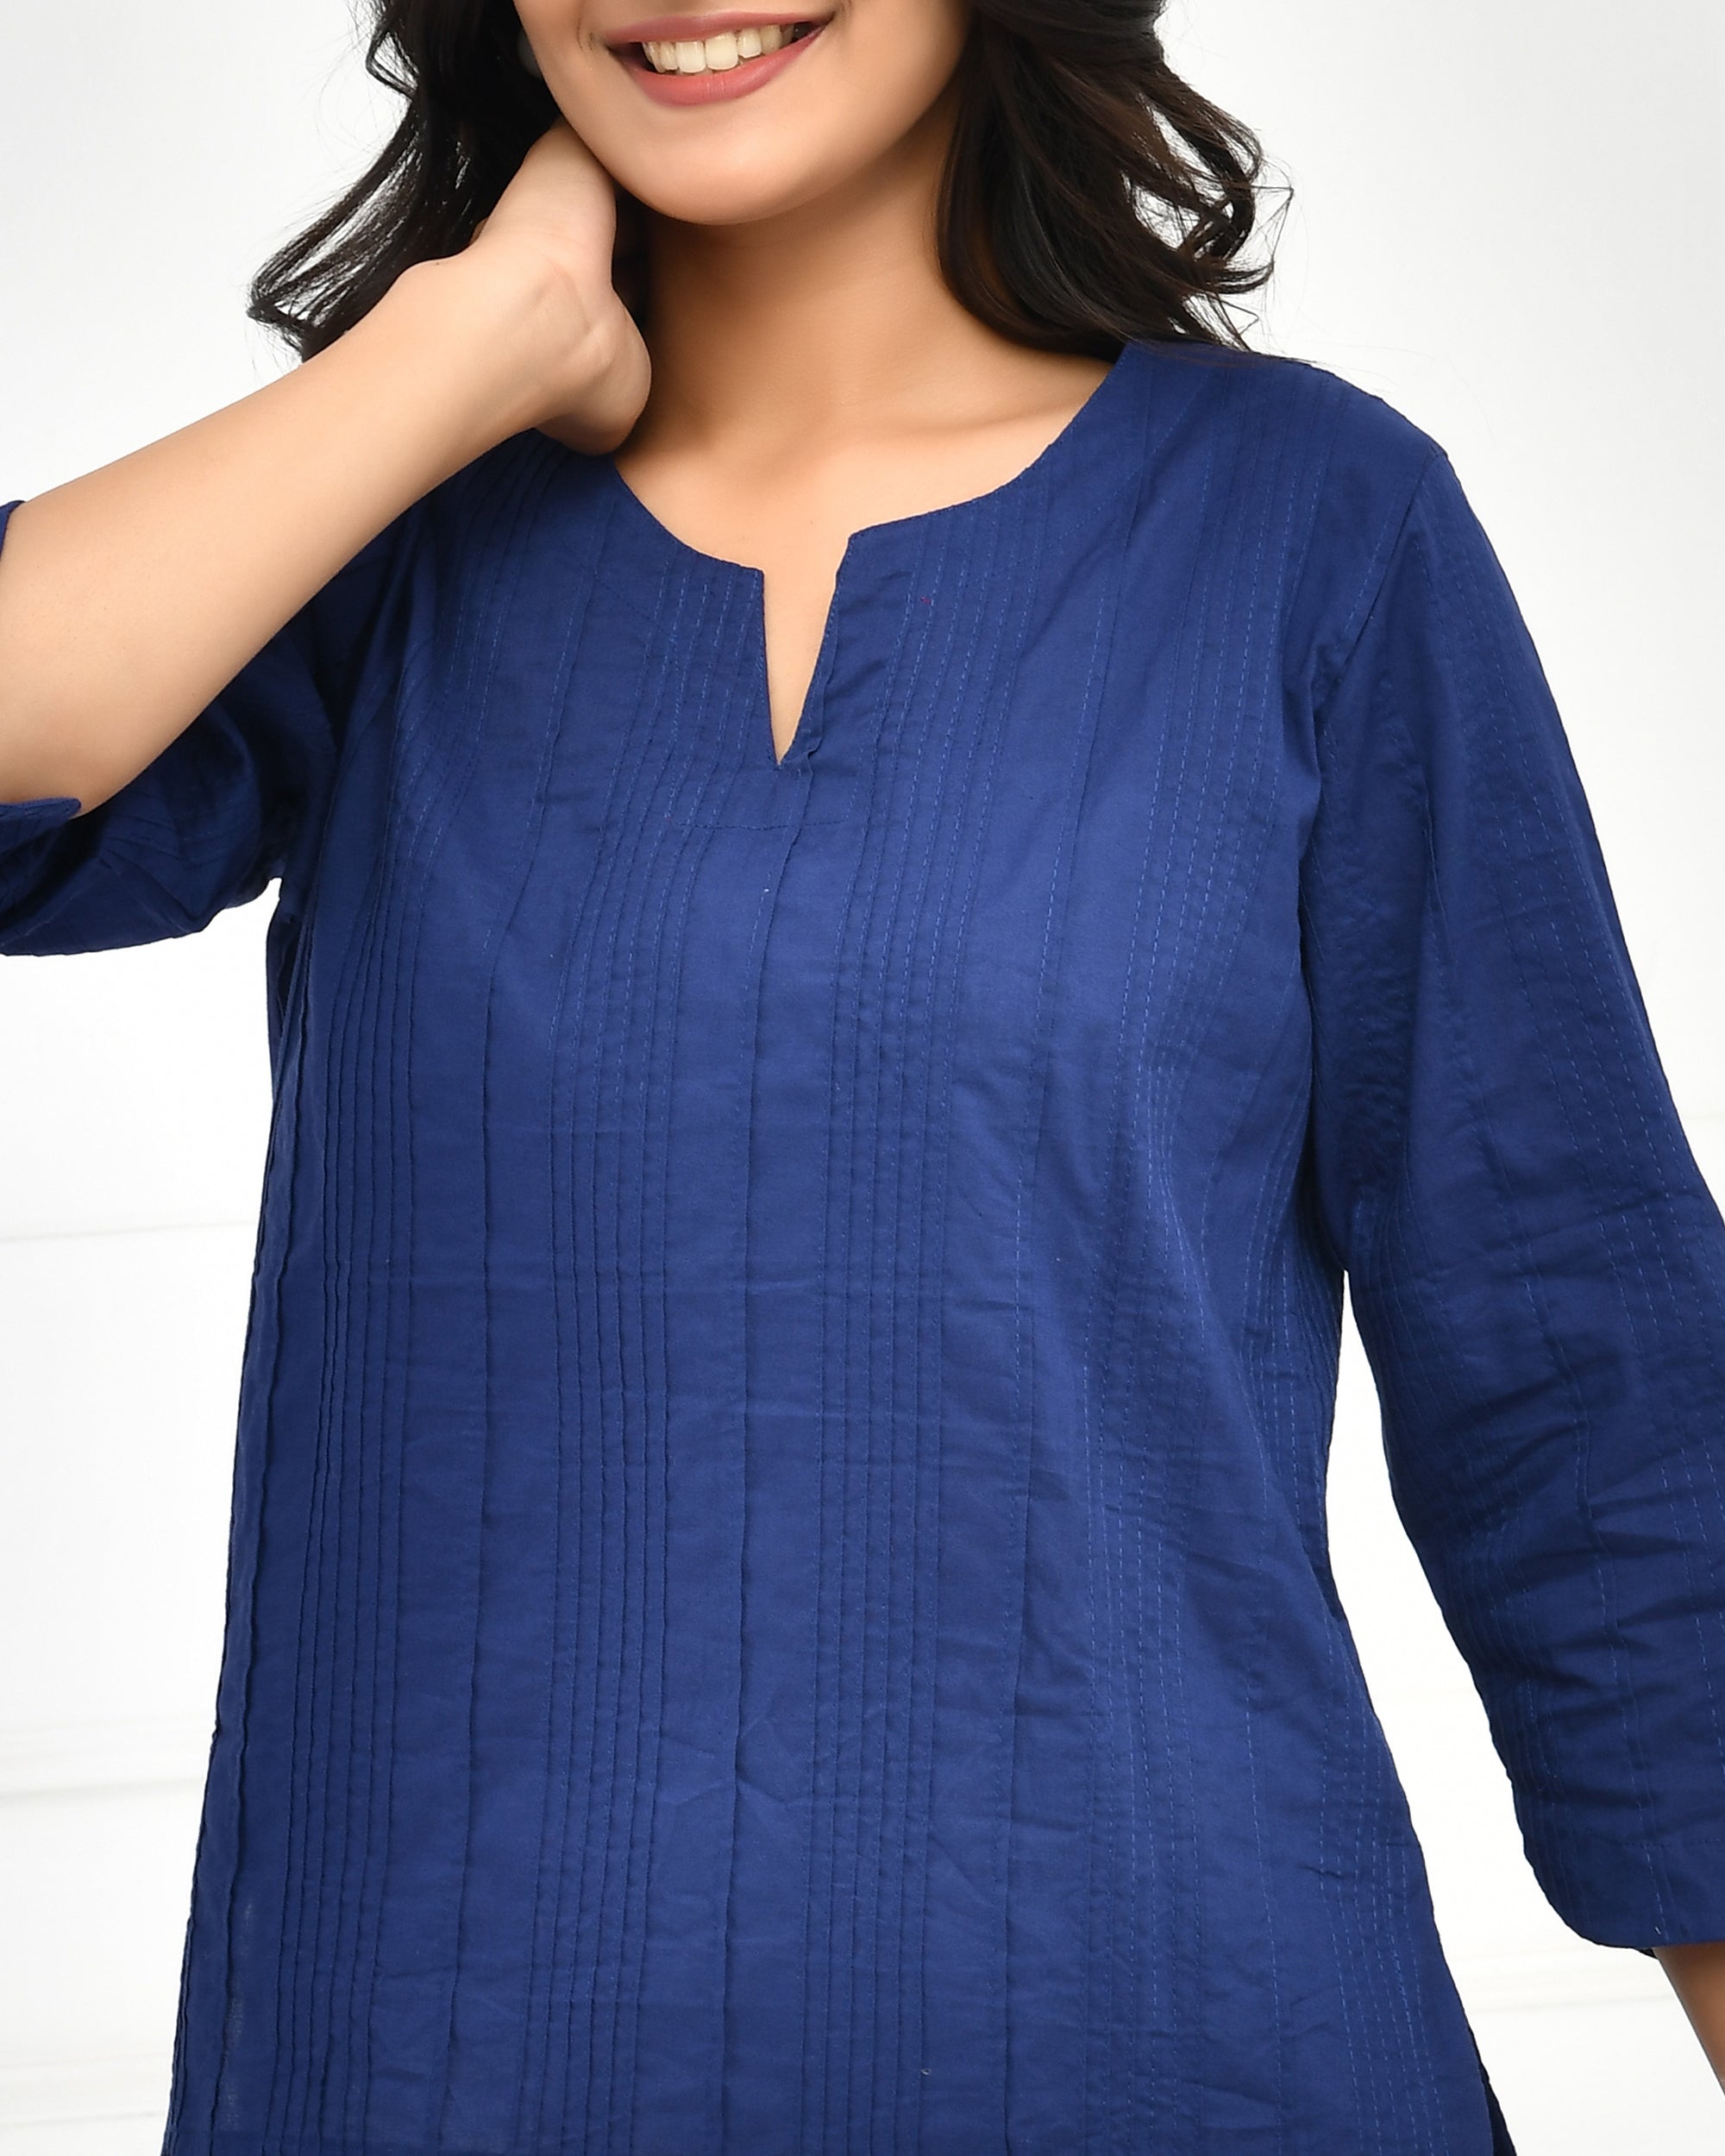 Royal Blue Everyday Cotton Top